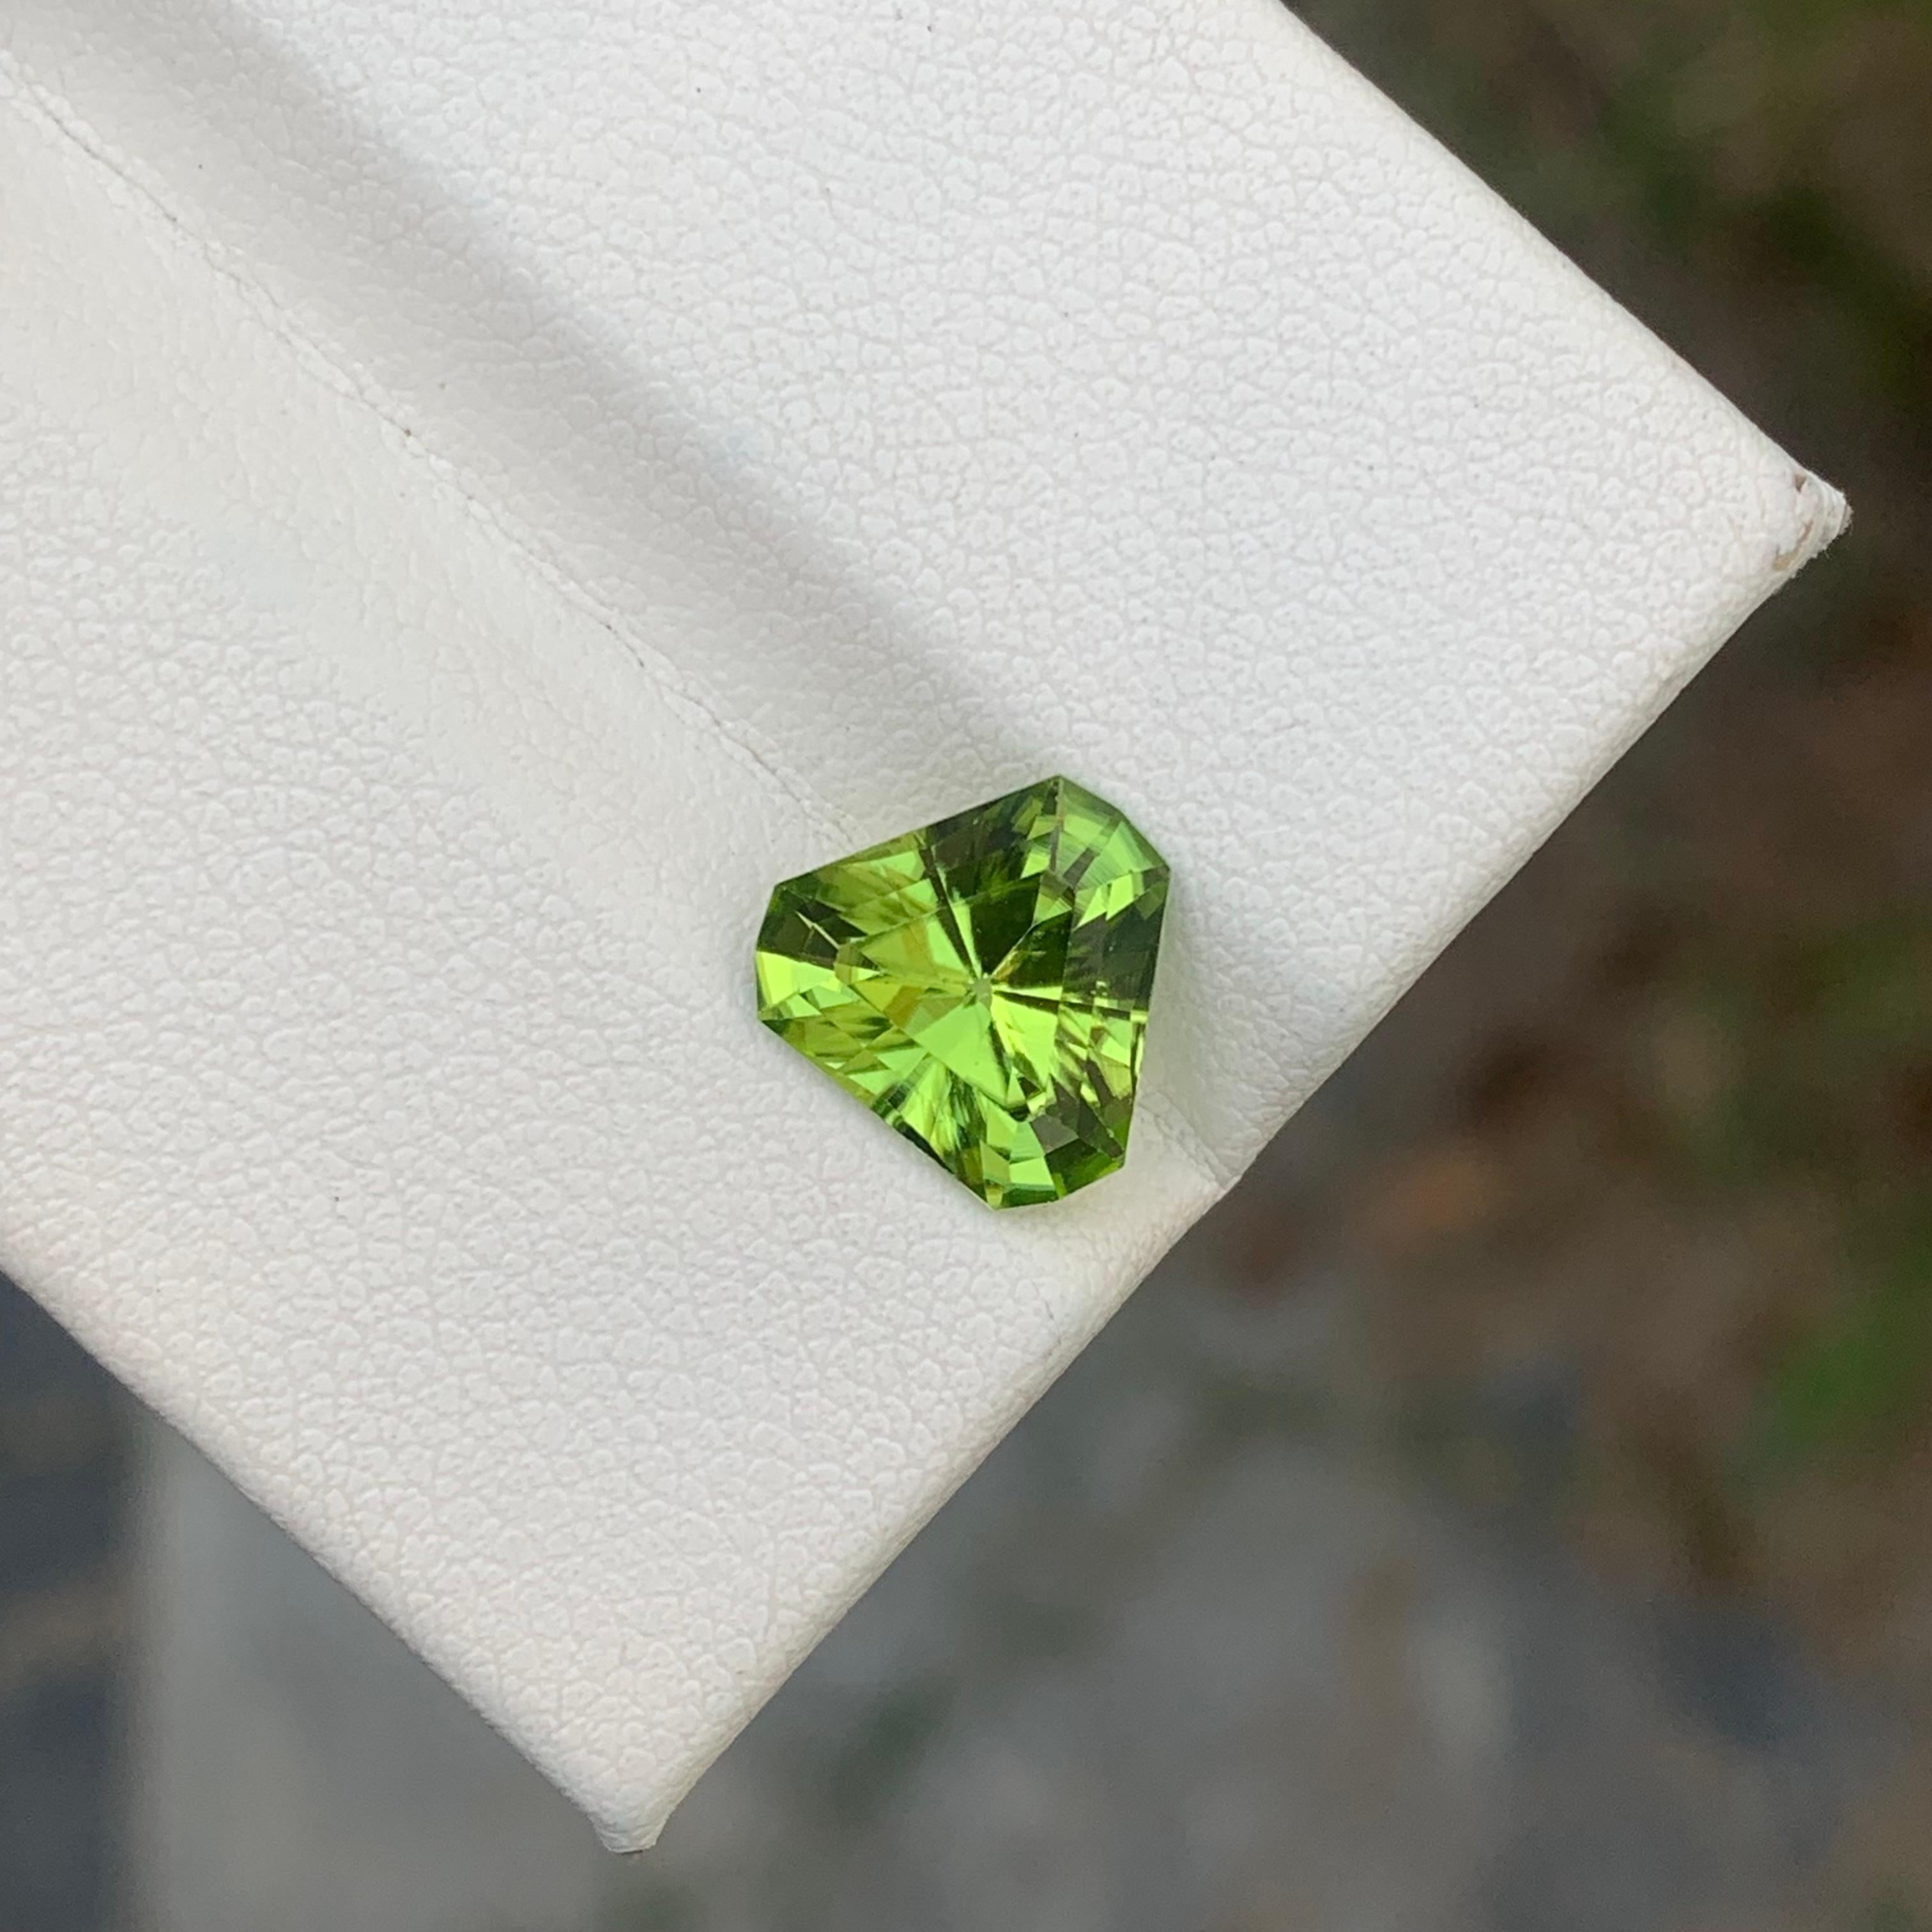 Loose Peridot
Weight: 2.75 Carats 
Dimension: 9.1x9.1x5 Mm
Origin: Pakistan
Shape: Trillion 
Color: Green
Certificate: On Demand 
Peridot is a captivating and unique gemstone known for its vibrant green color and rich history. This gem, with its